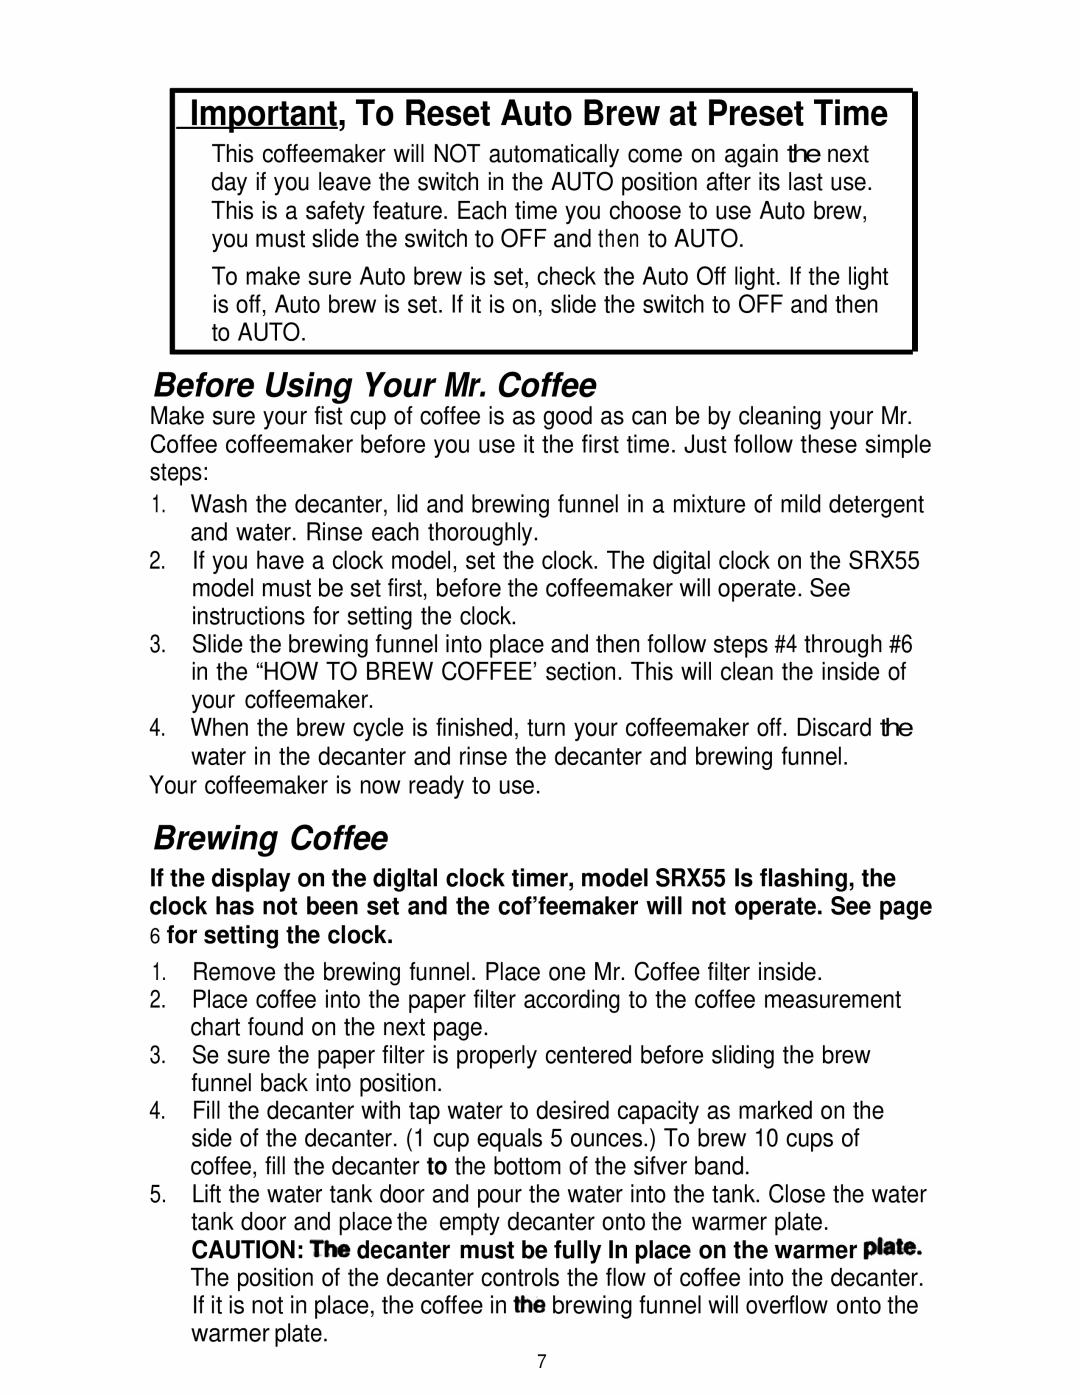 Mr. Coffee SR10, SRX55 manual Important, To Reset Auto Brew at Preset Time, Before Using Your Mr. Coffee, Brewing Coffee 